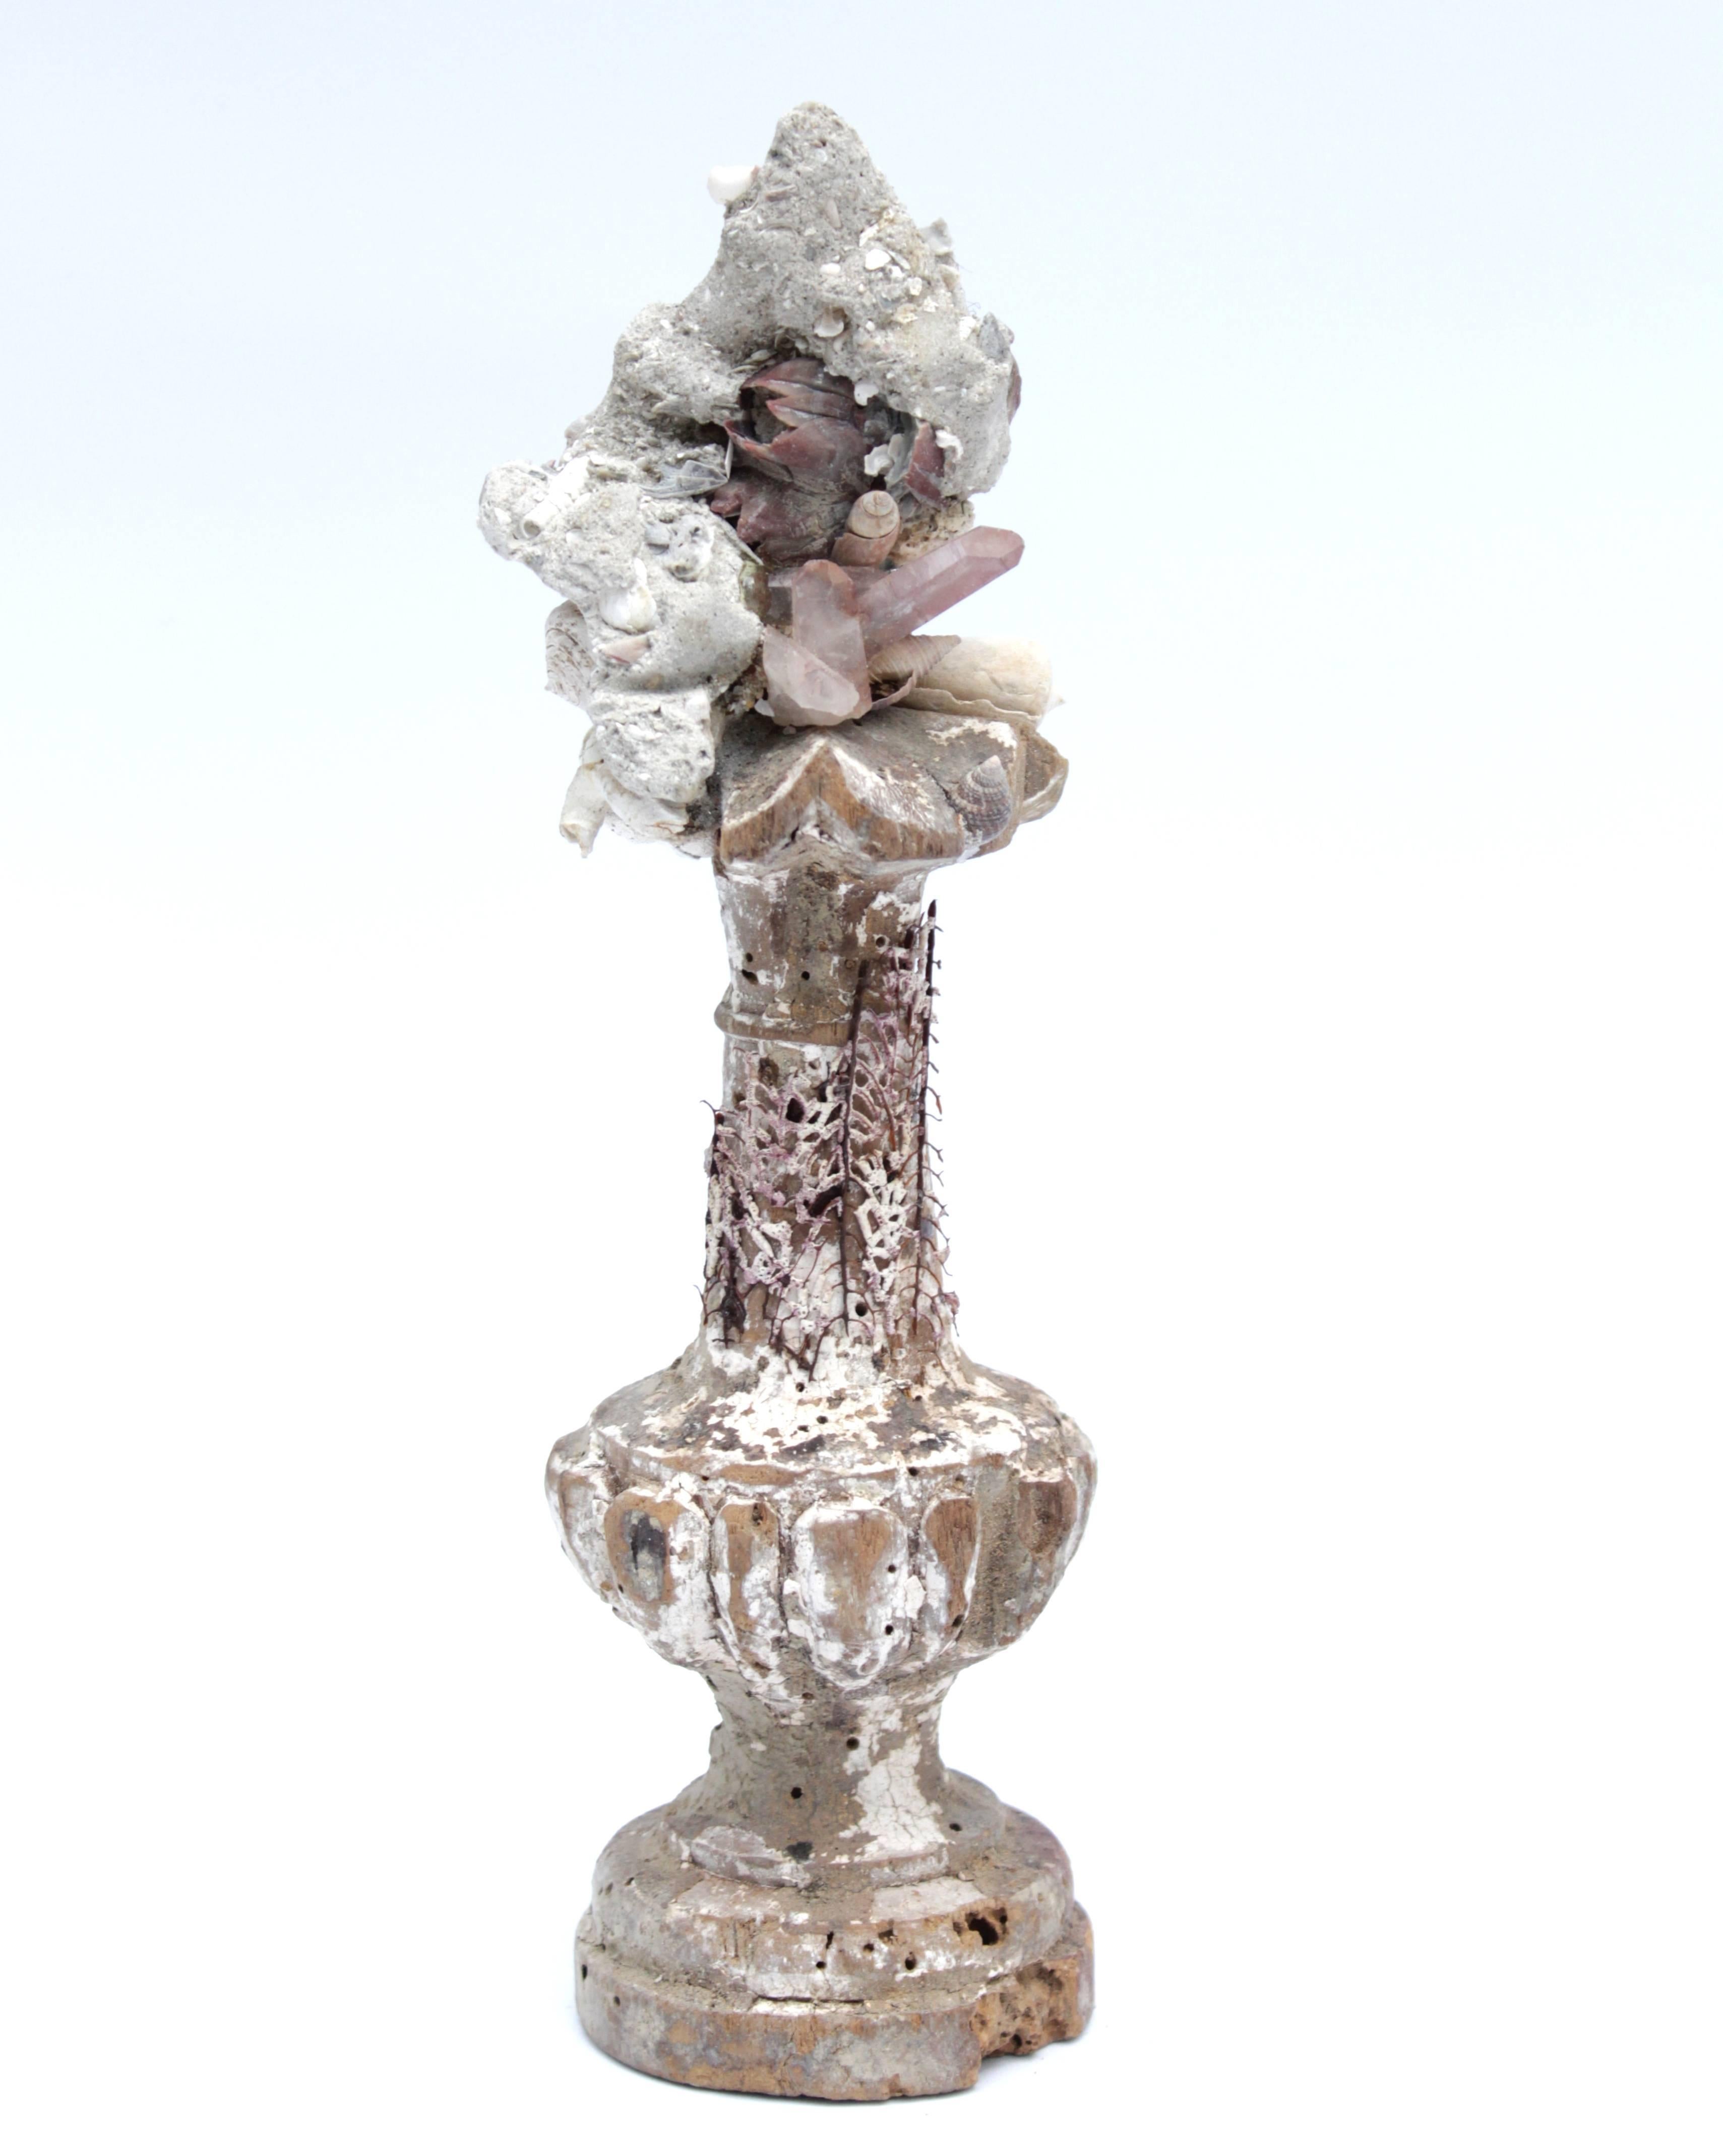 18th century Italian church alter vase fragment (Florence) decorated with barnacles and fossil shells in matrix and crystal quartz points.